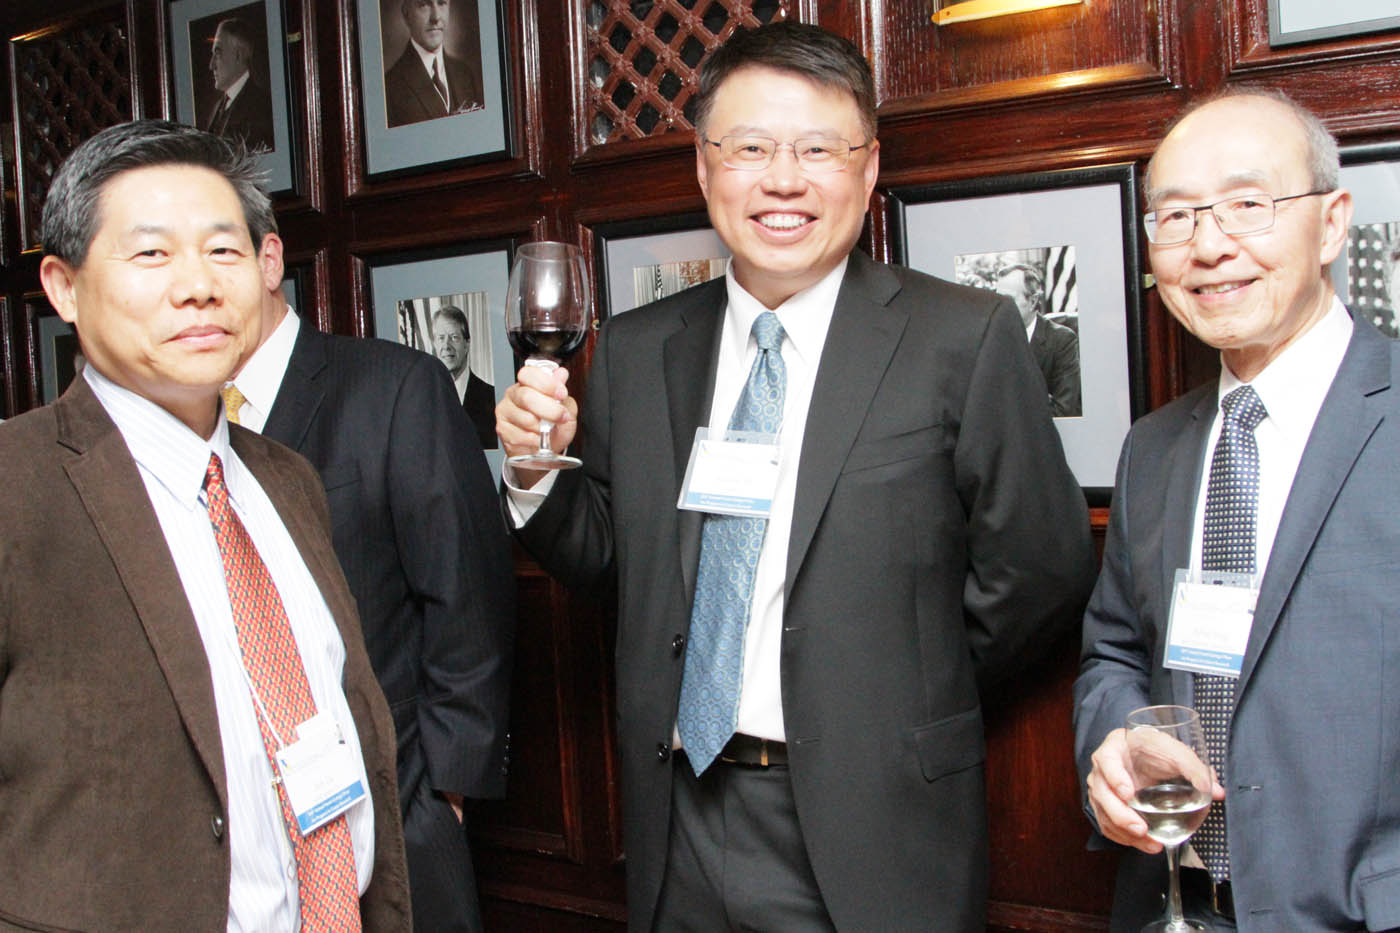 (L to R) Sun Lu from Genecopeia, Dr. Wei Wu He from OriGene, and Dr. Alfred Yung from MD Anderson Cancer Center enjoying the pre-reception cocktail hour